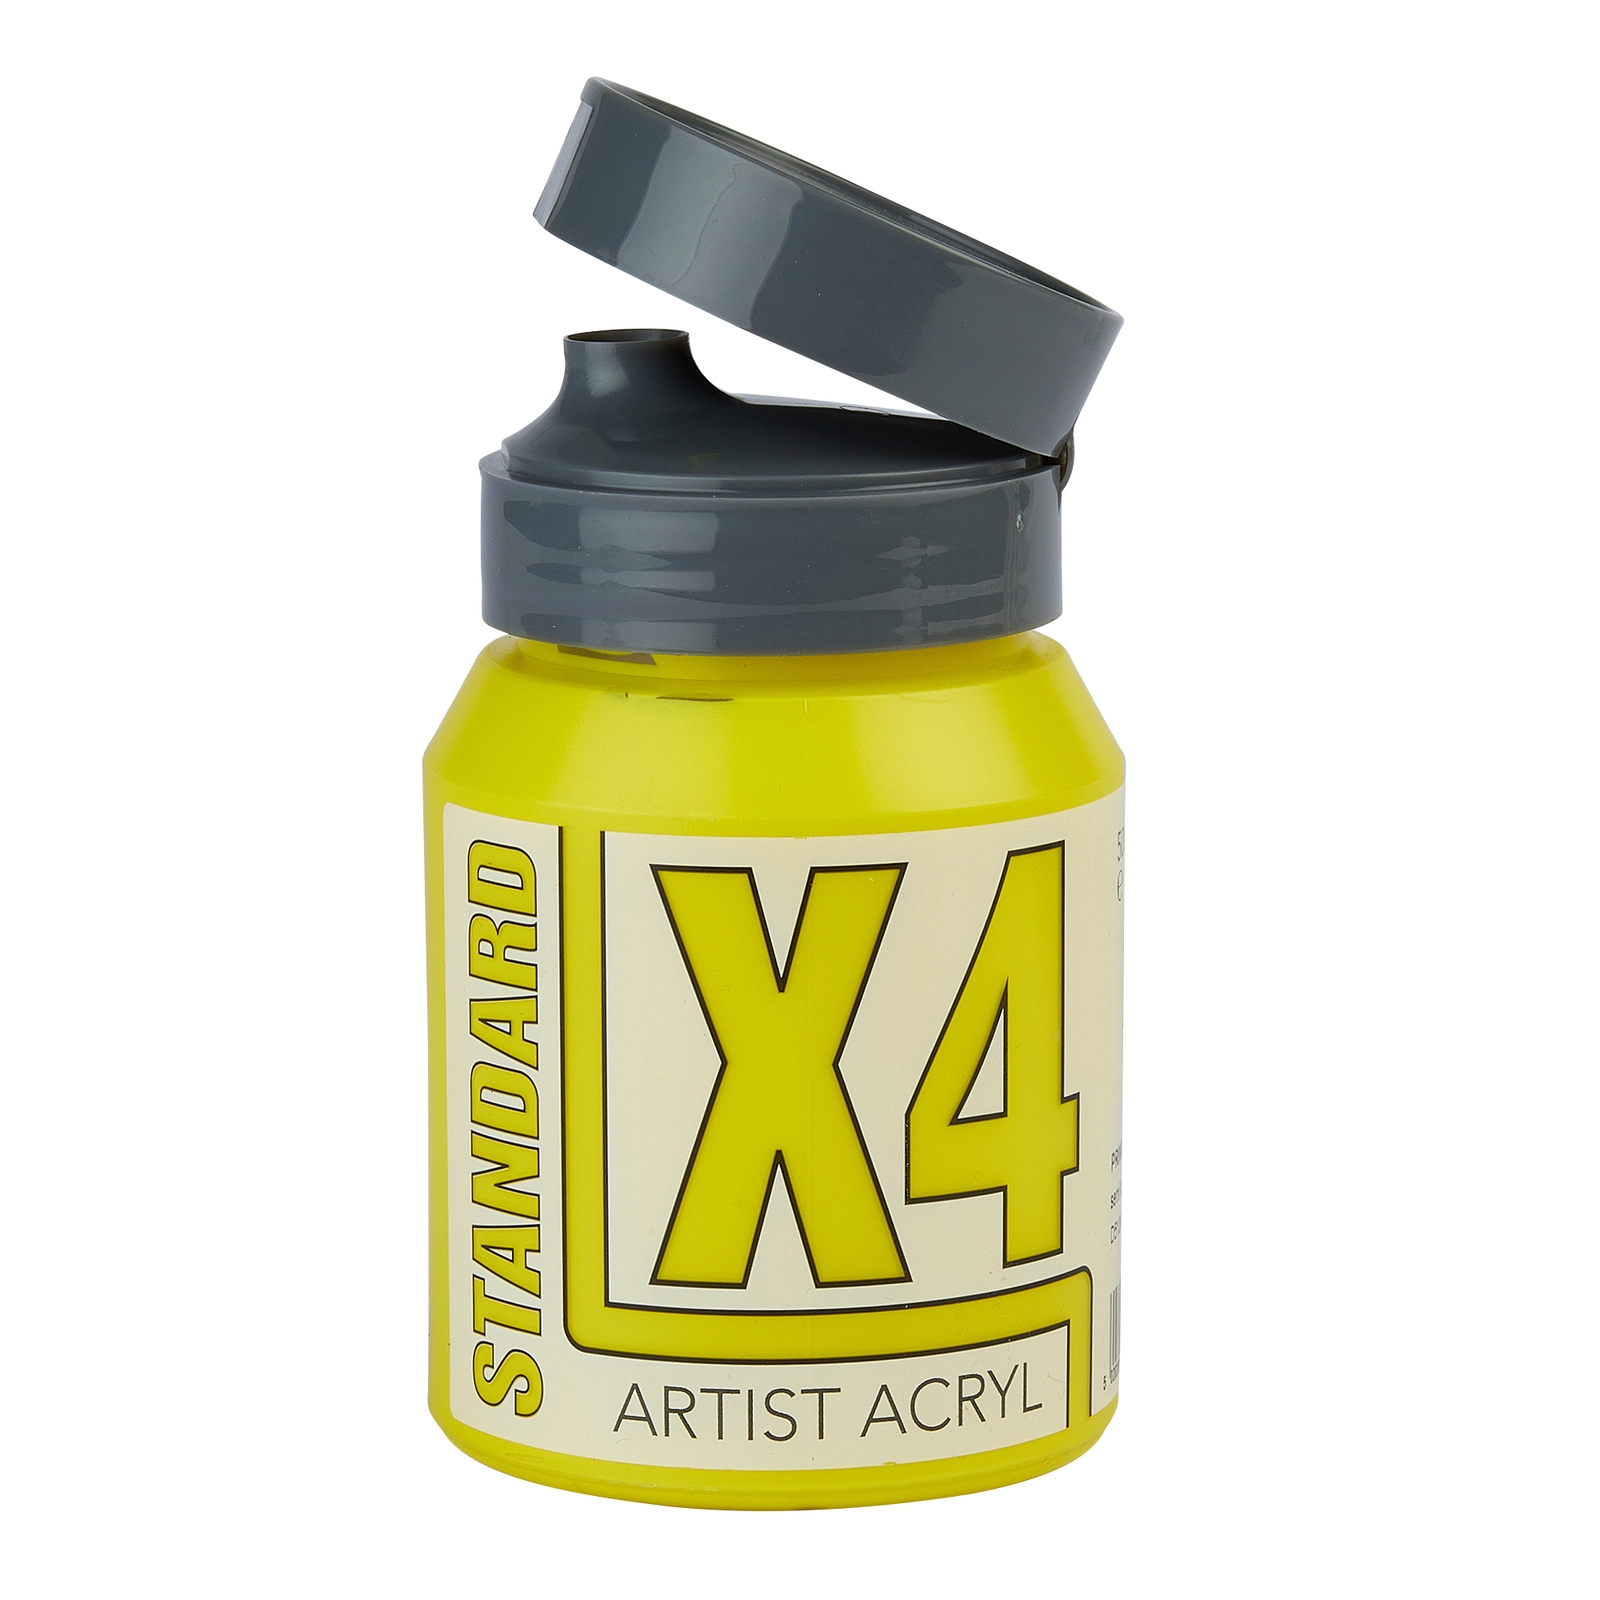 Specialist Crafts X4 Standard Primary Yellow Acryl/Acrylic Paint - 500ml - Each